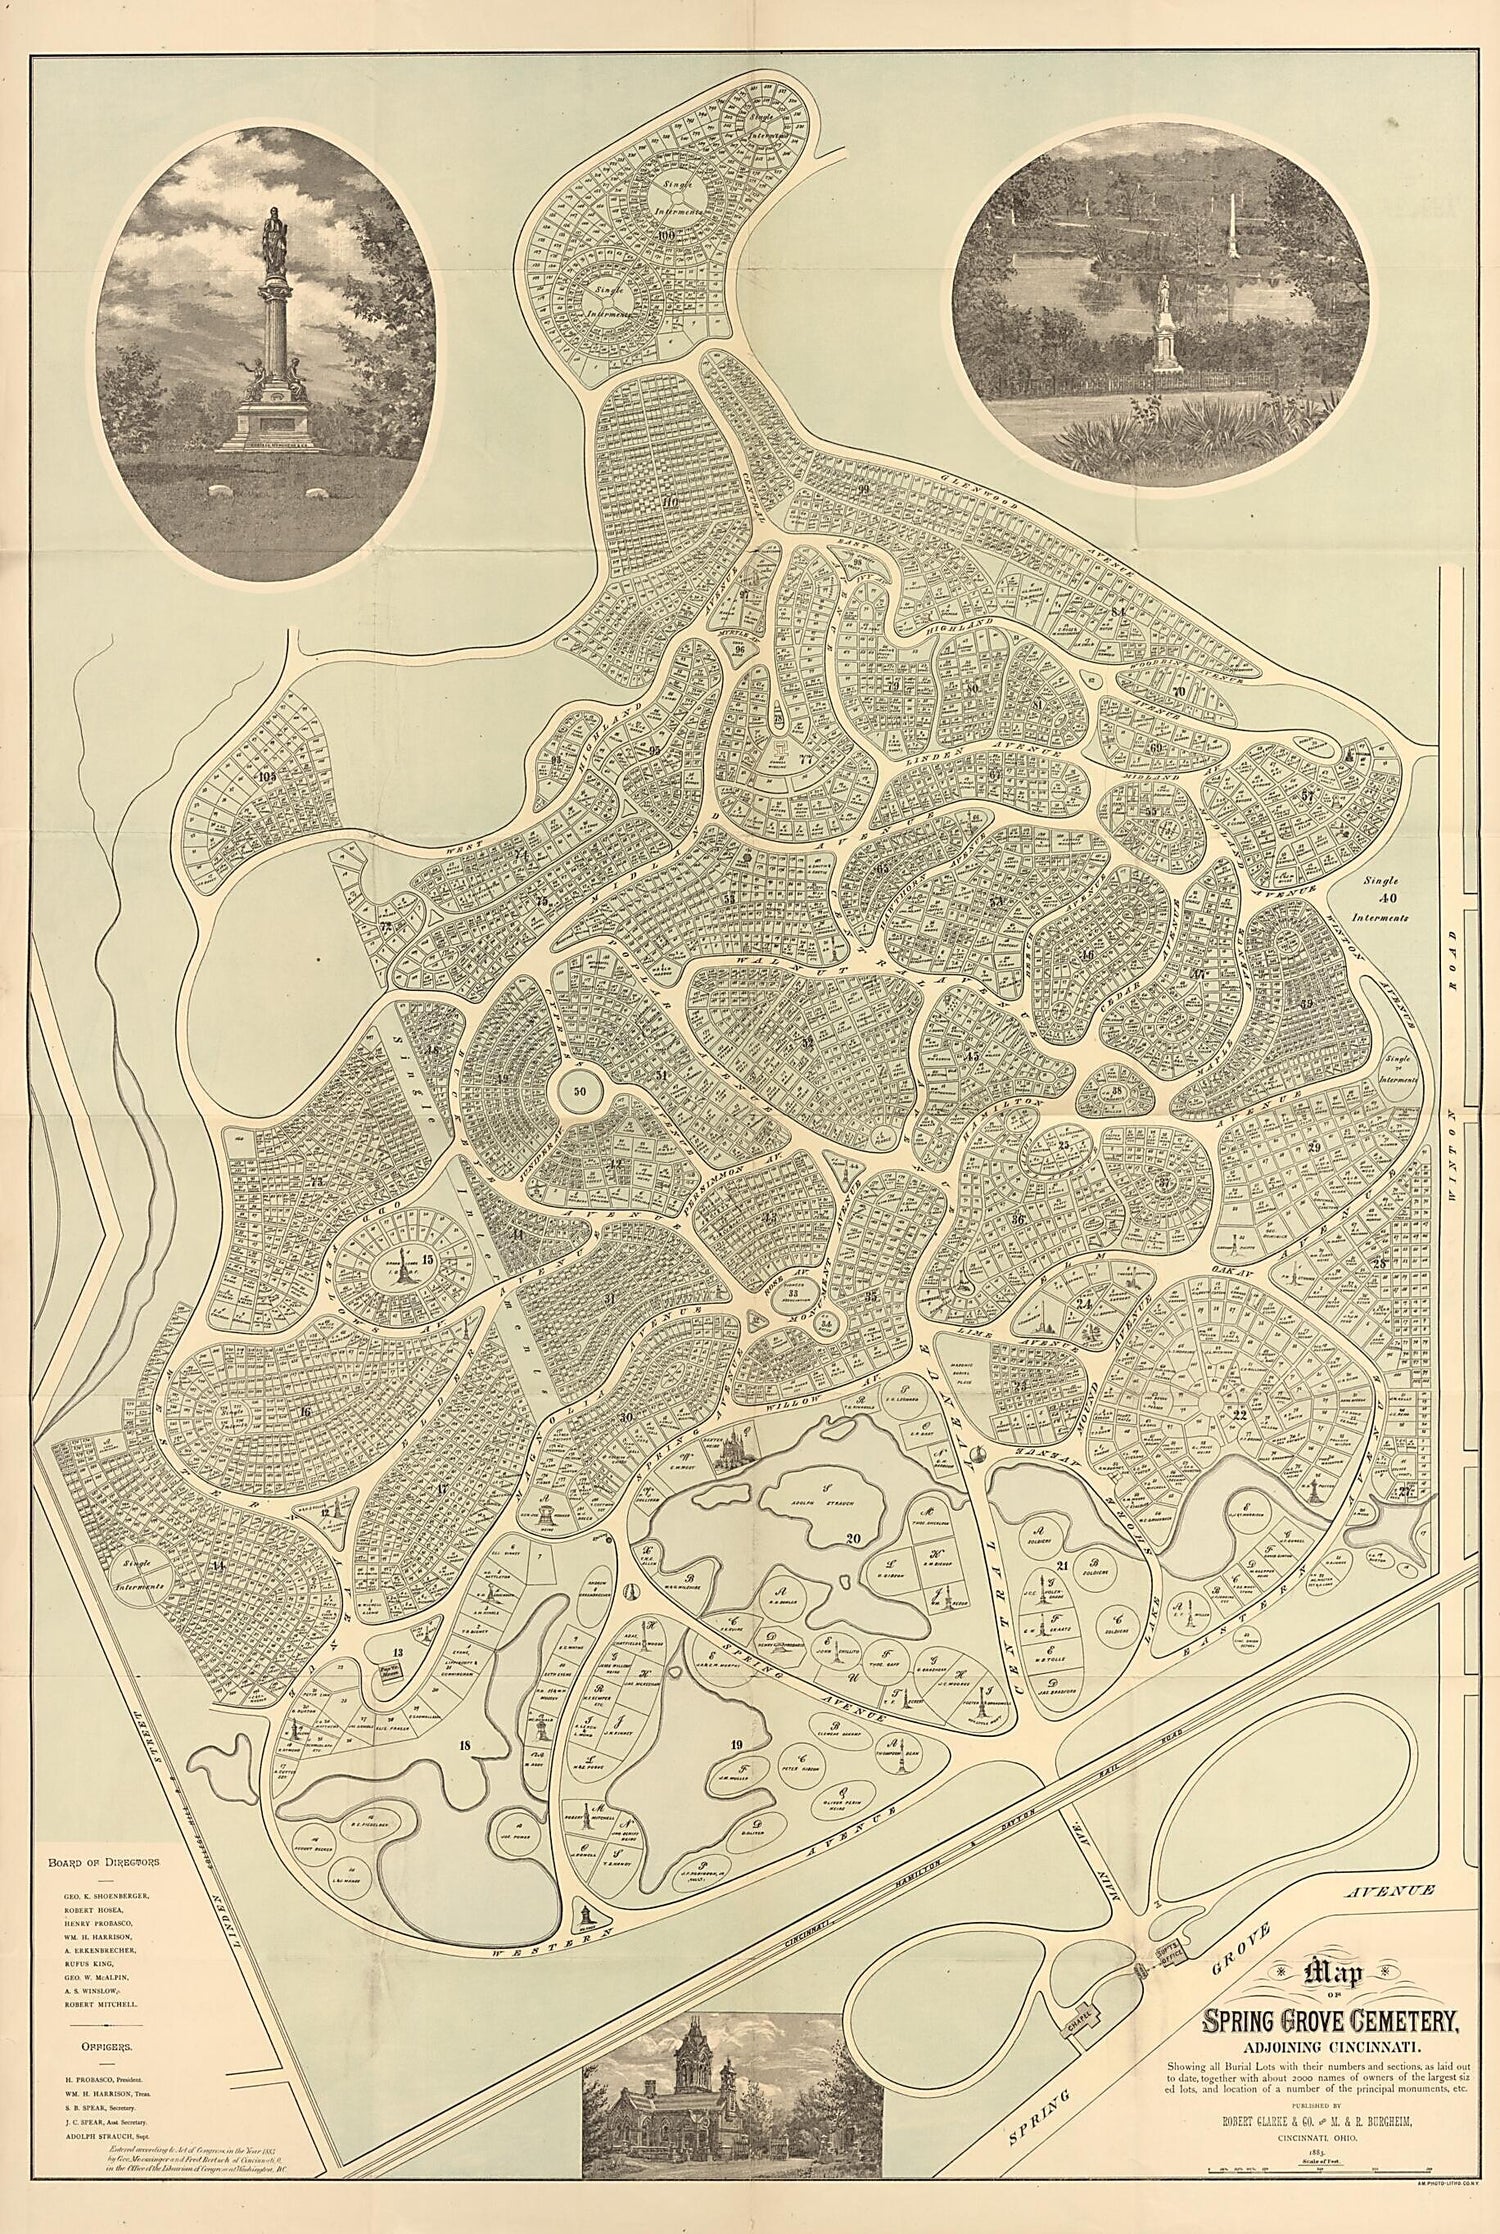 This old map of Map of Spring Grove Cemetery, Adjoining Cincinnati : Showing All Burial Lots With Their Numbers and Sections, As Laid Out to Date, Together With About 2000 Names of Owners of the Largest Sized Lots, and Location of a Number of the Princip